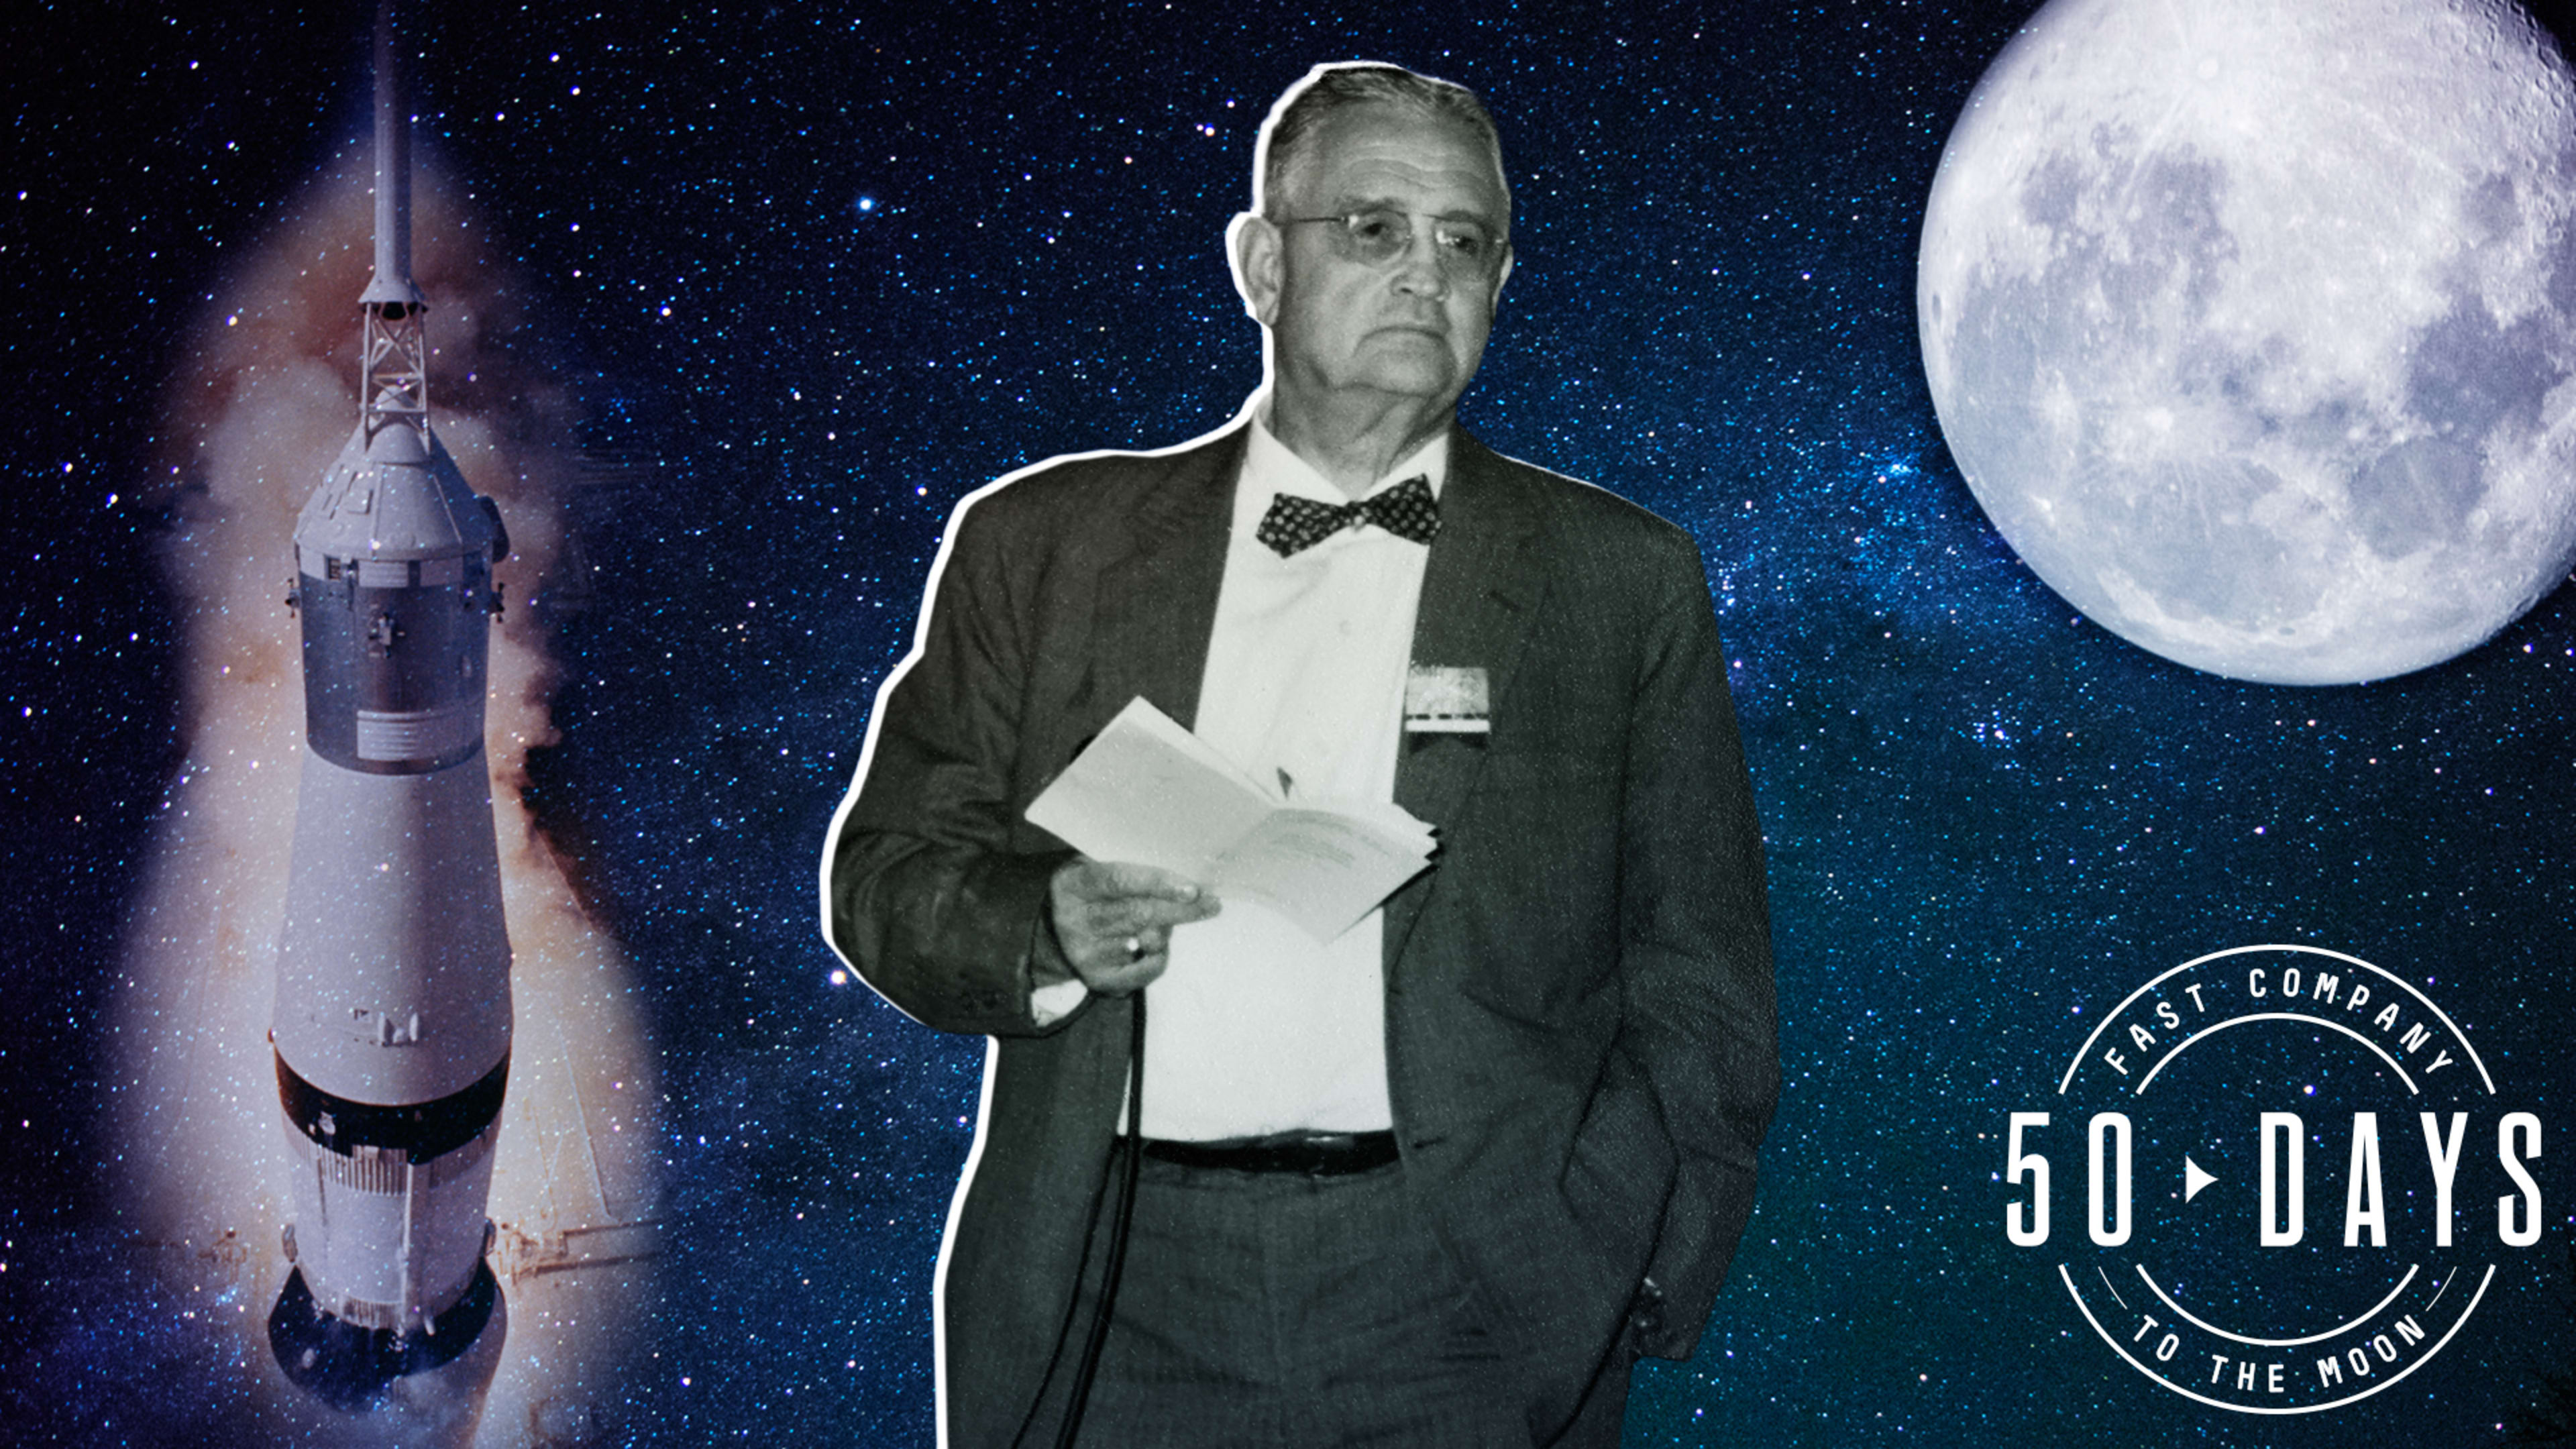 This prominent MIT scientist wanted to bet his life by flying to the Moon